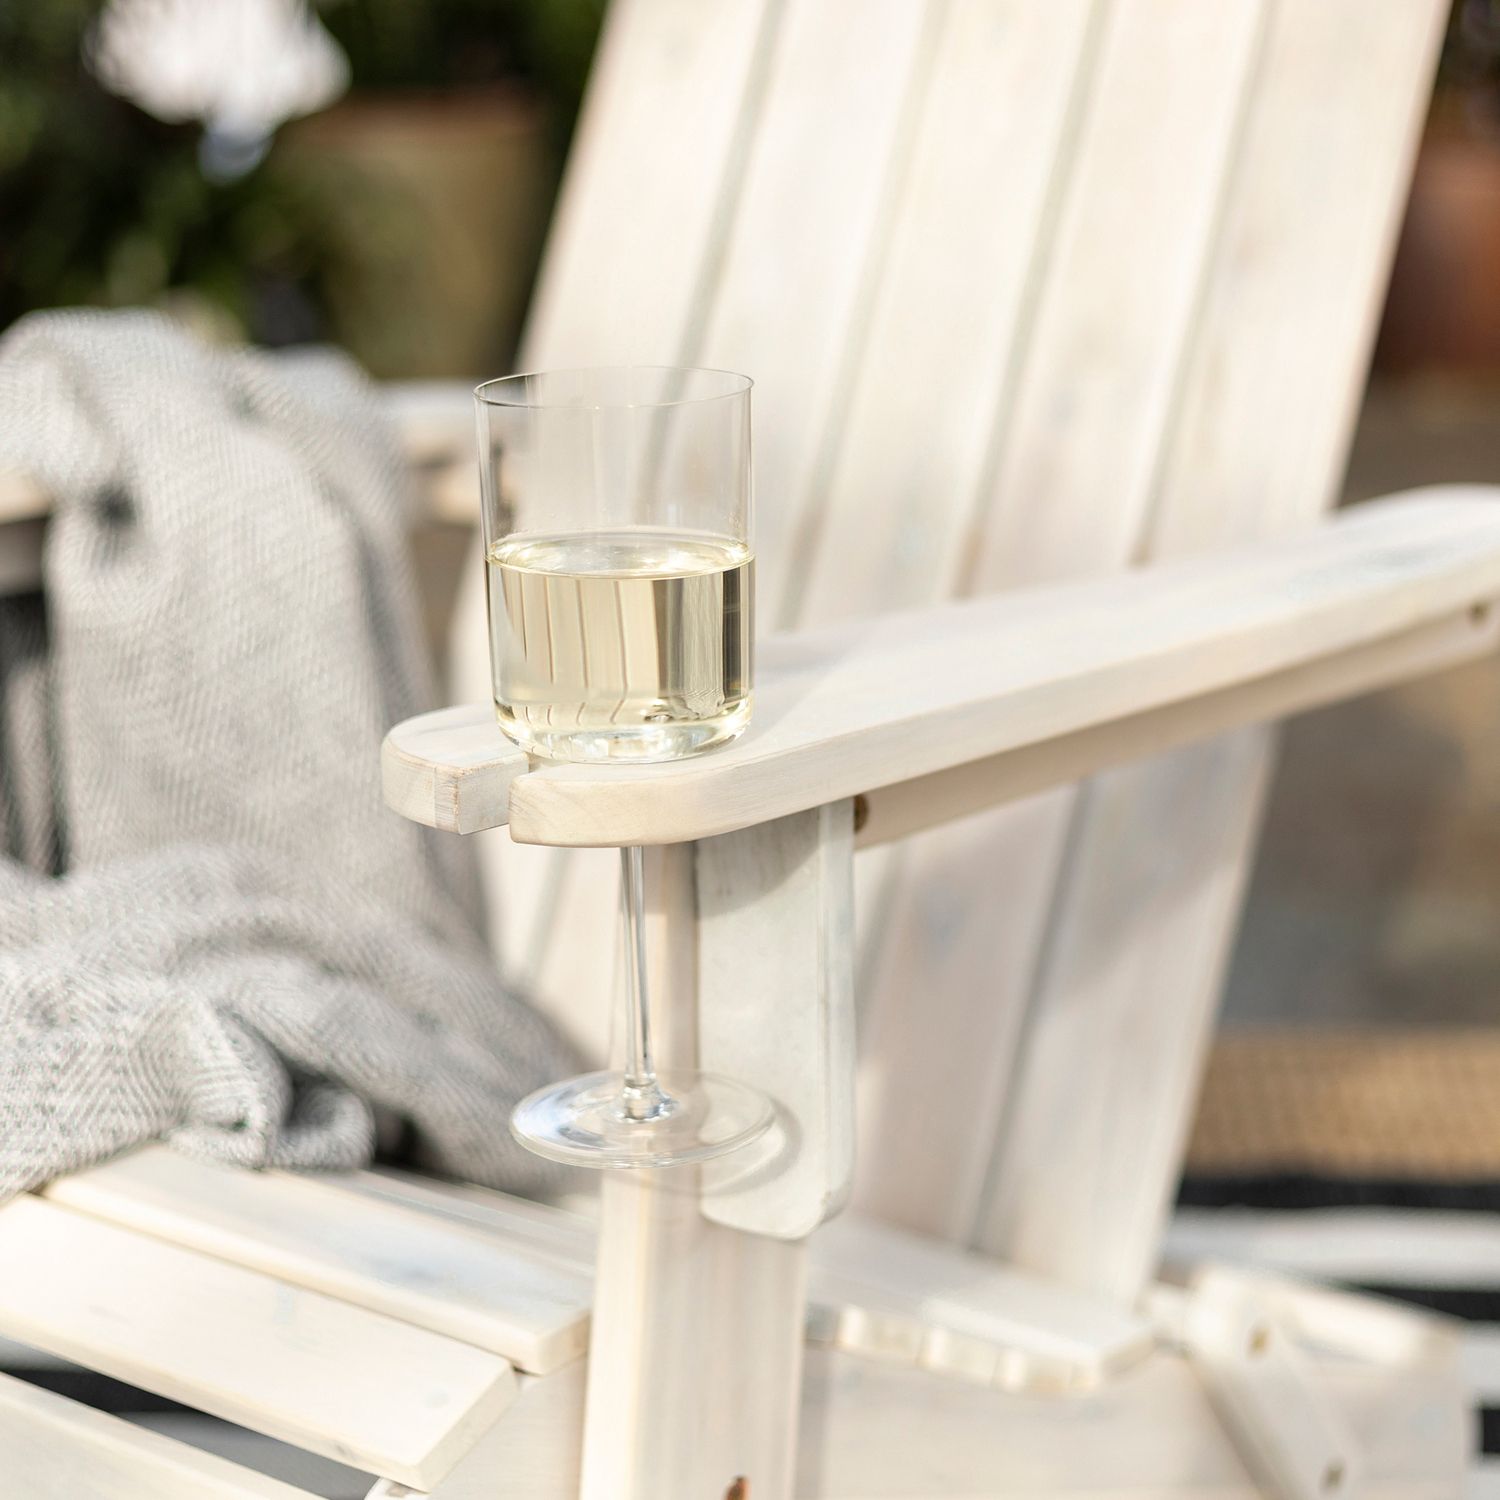 2019 Outdoor Chair With Wine Holder Throughout Foldable White Adirondack Chair With Wine Glass Holder – Pier (View 7 of 15)